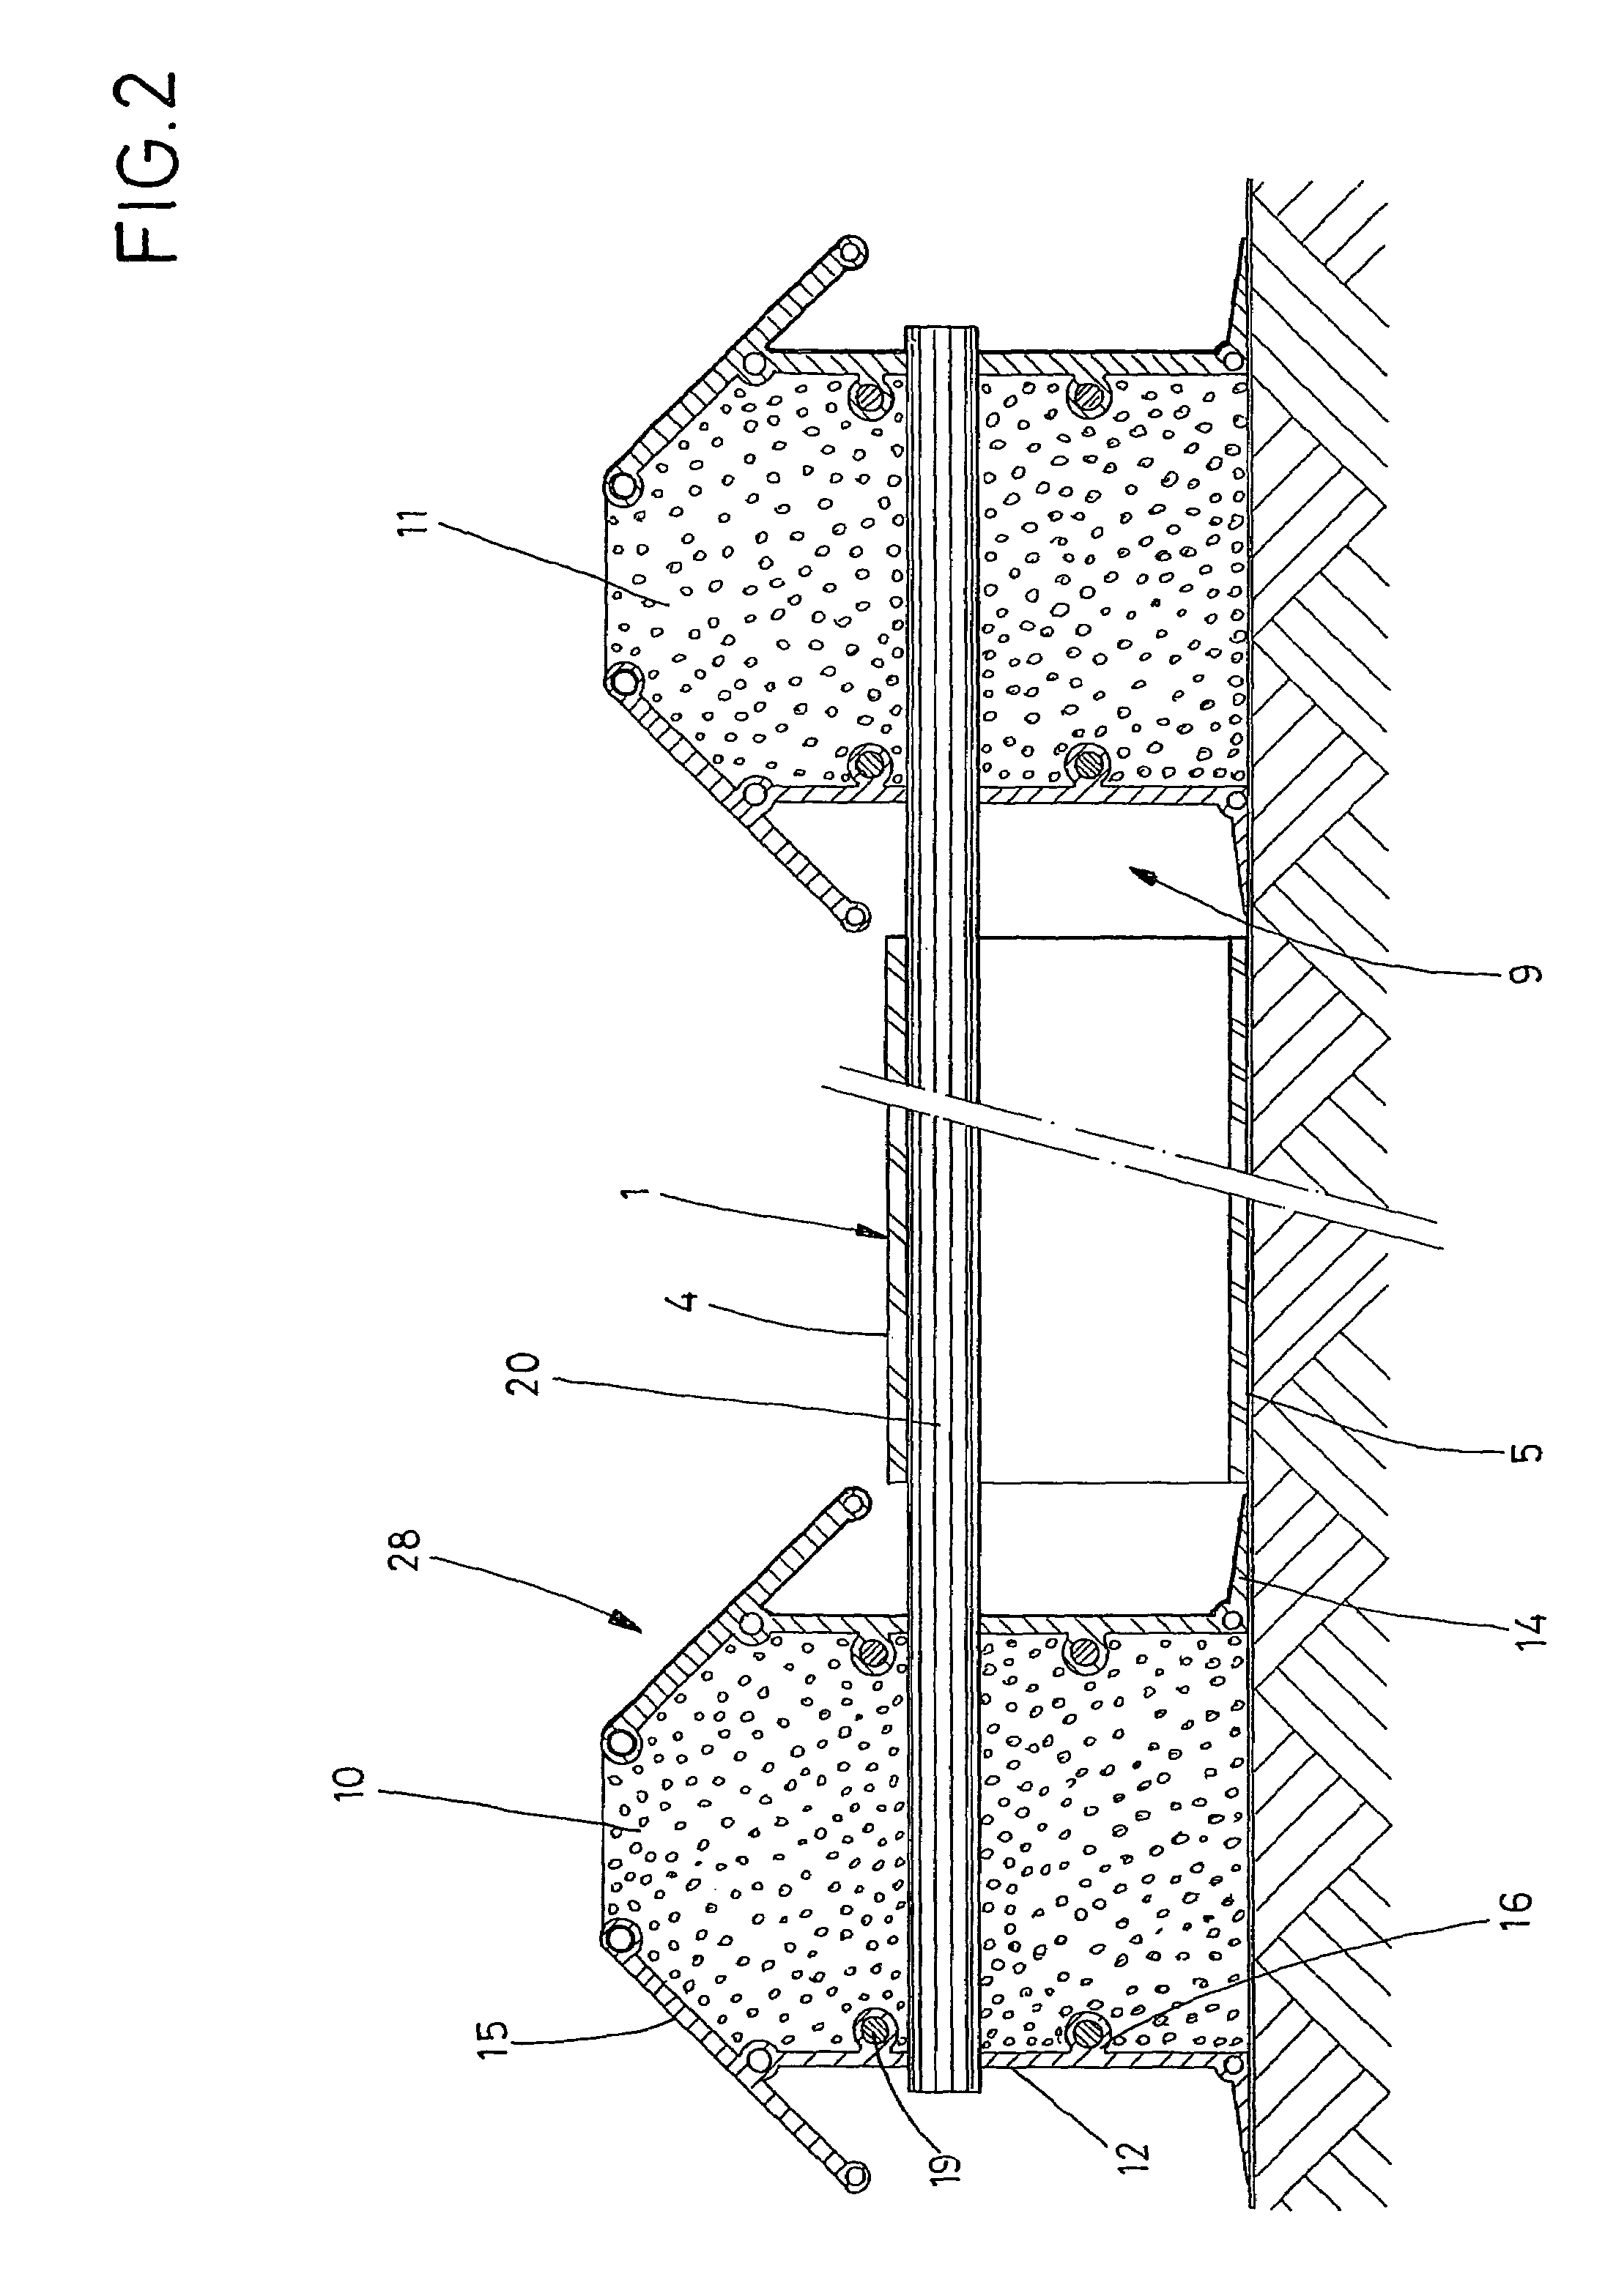 Method for operating a feces conveyor device